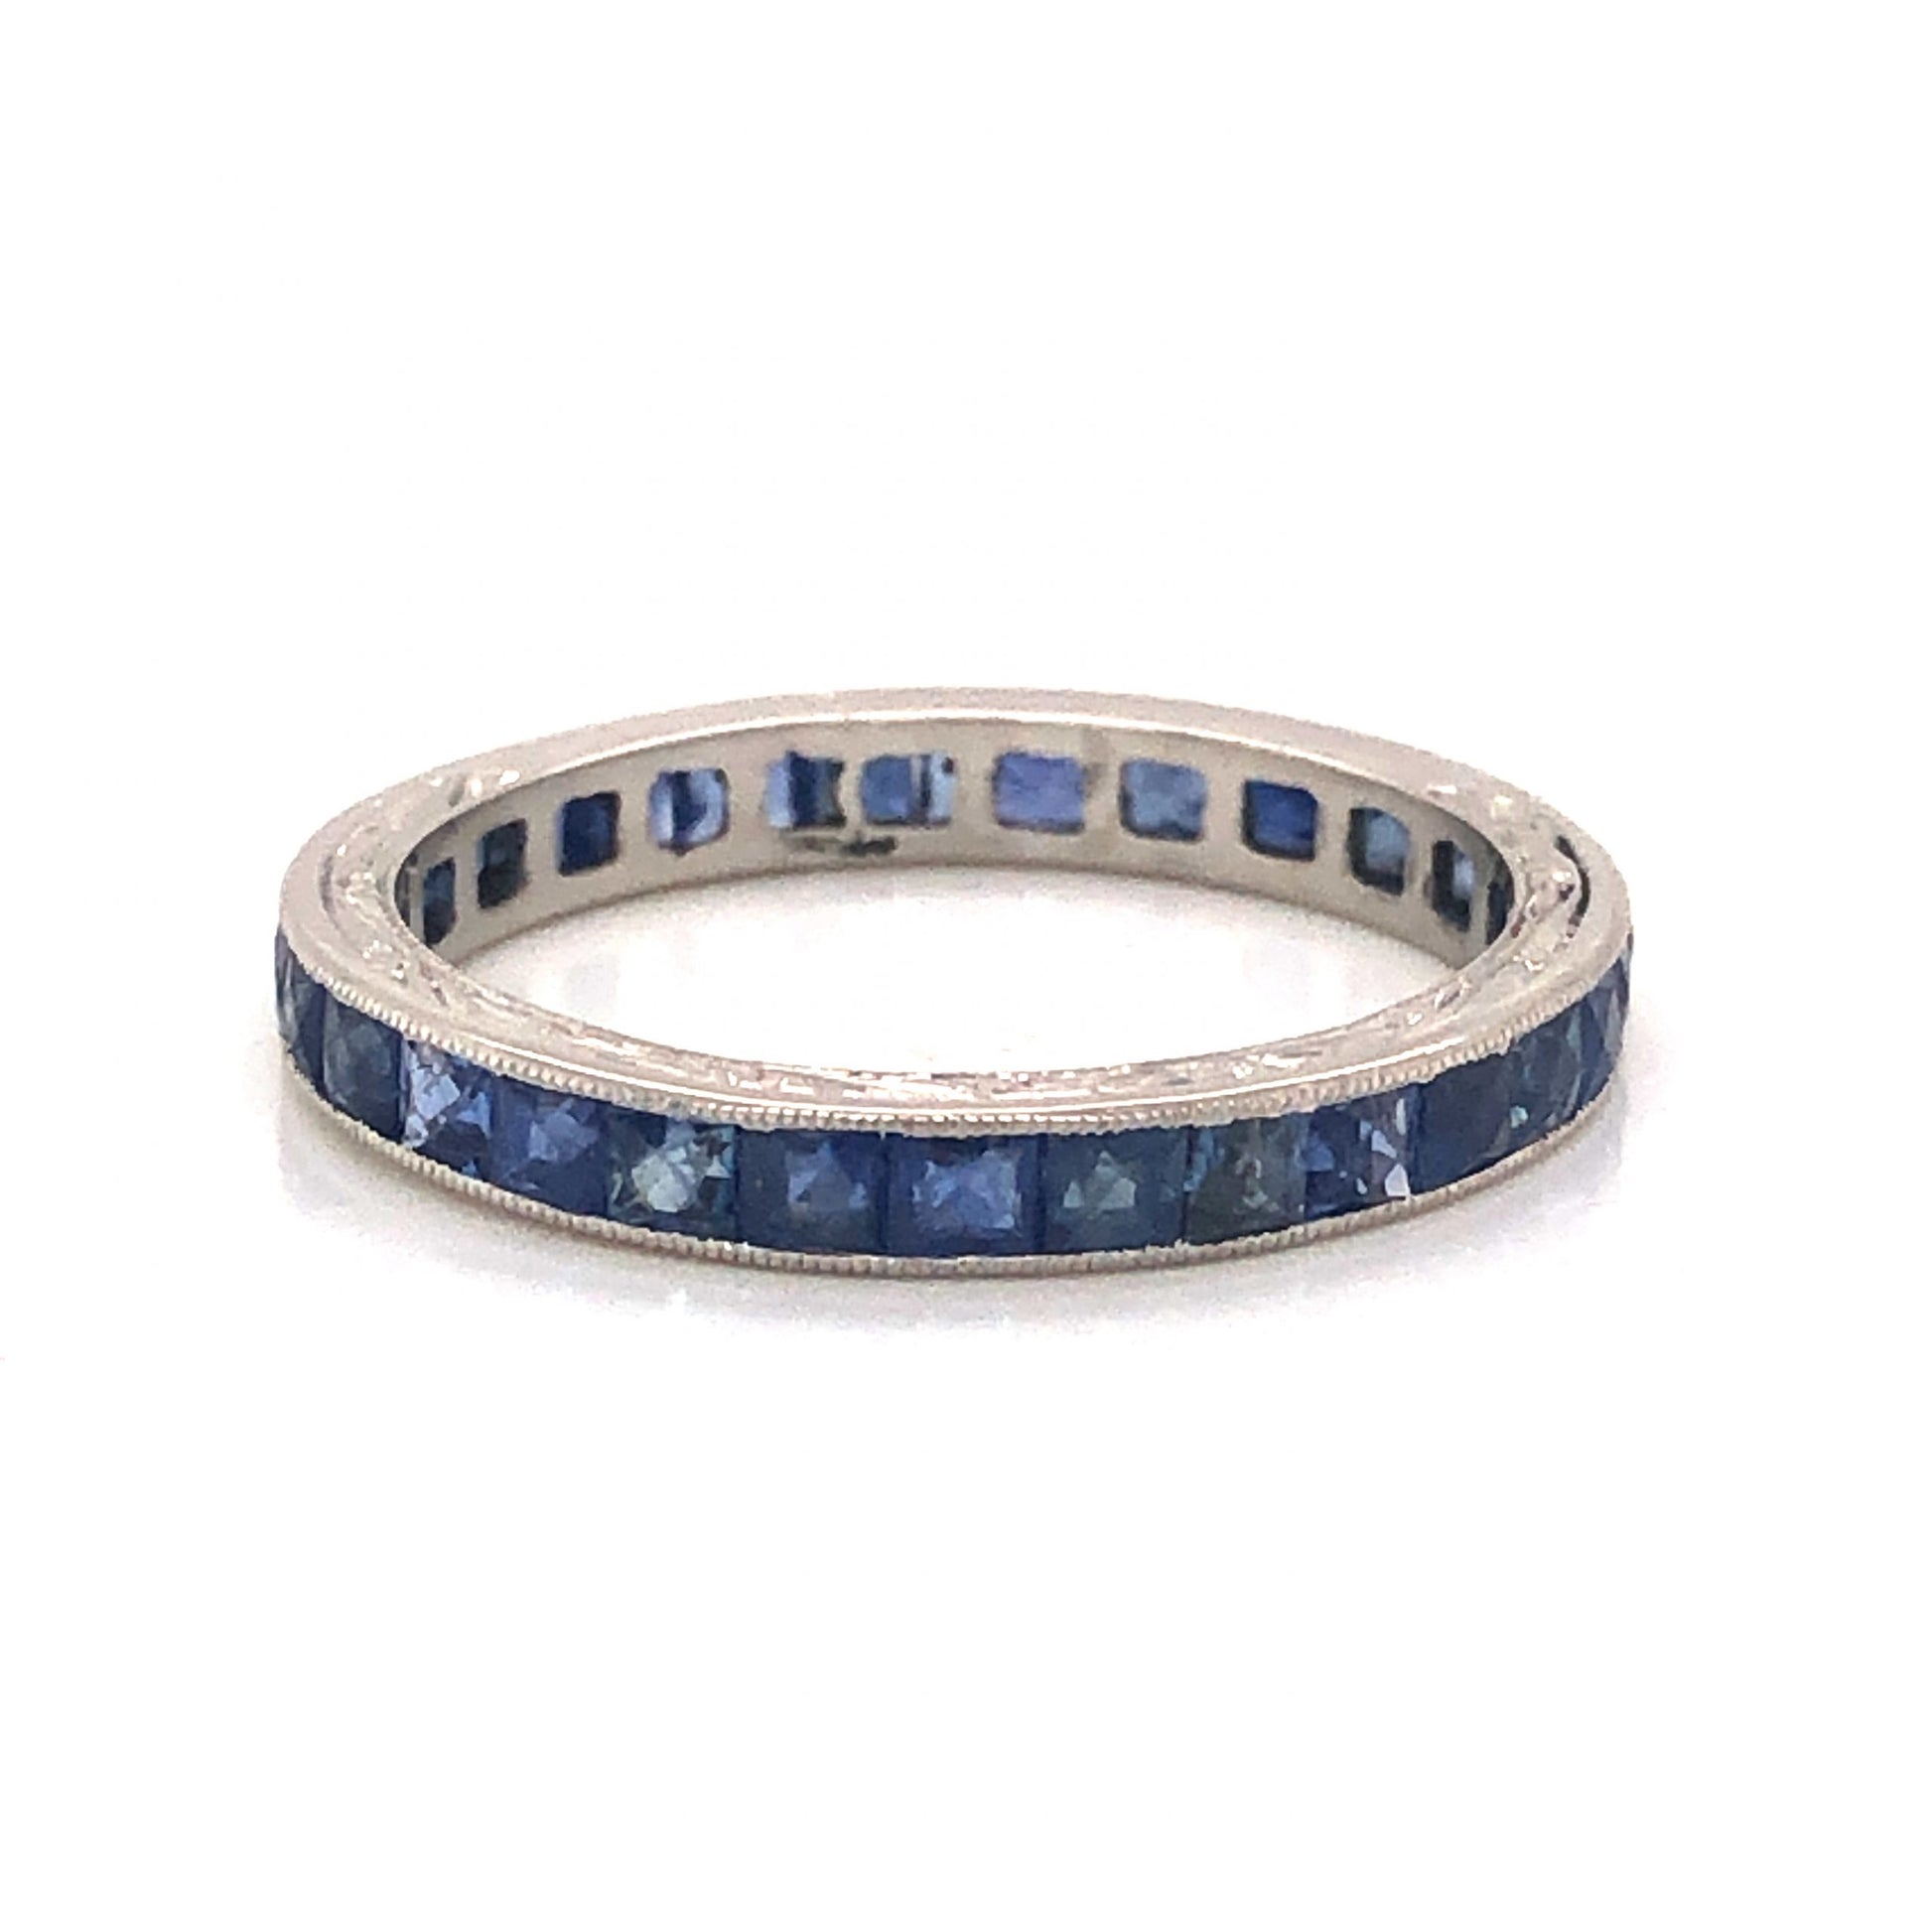 Art Deco French Cut Sapphire Wedding Band in PlatinumComposition: PlatinumRing Size: 5.25Total Gram Weight: 2.0 g